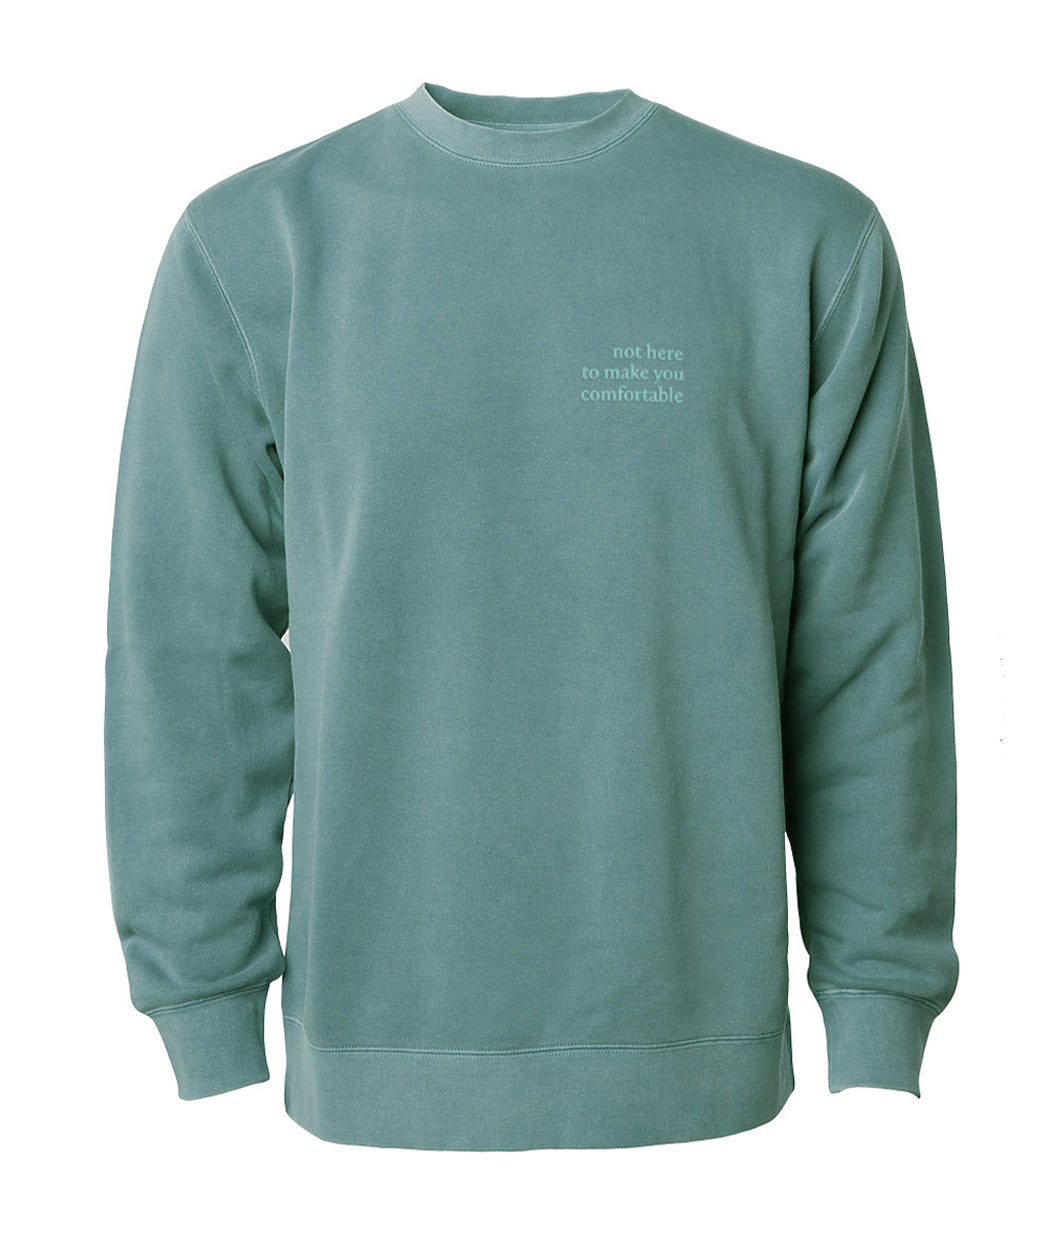 Green crewneck sweatshirt with “not hear to make you comfortable” in green serif font at the top right of the sweater - from Iz Harris